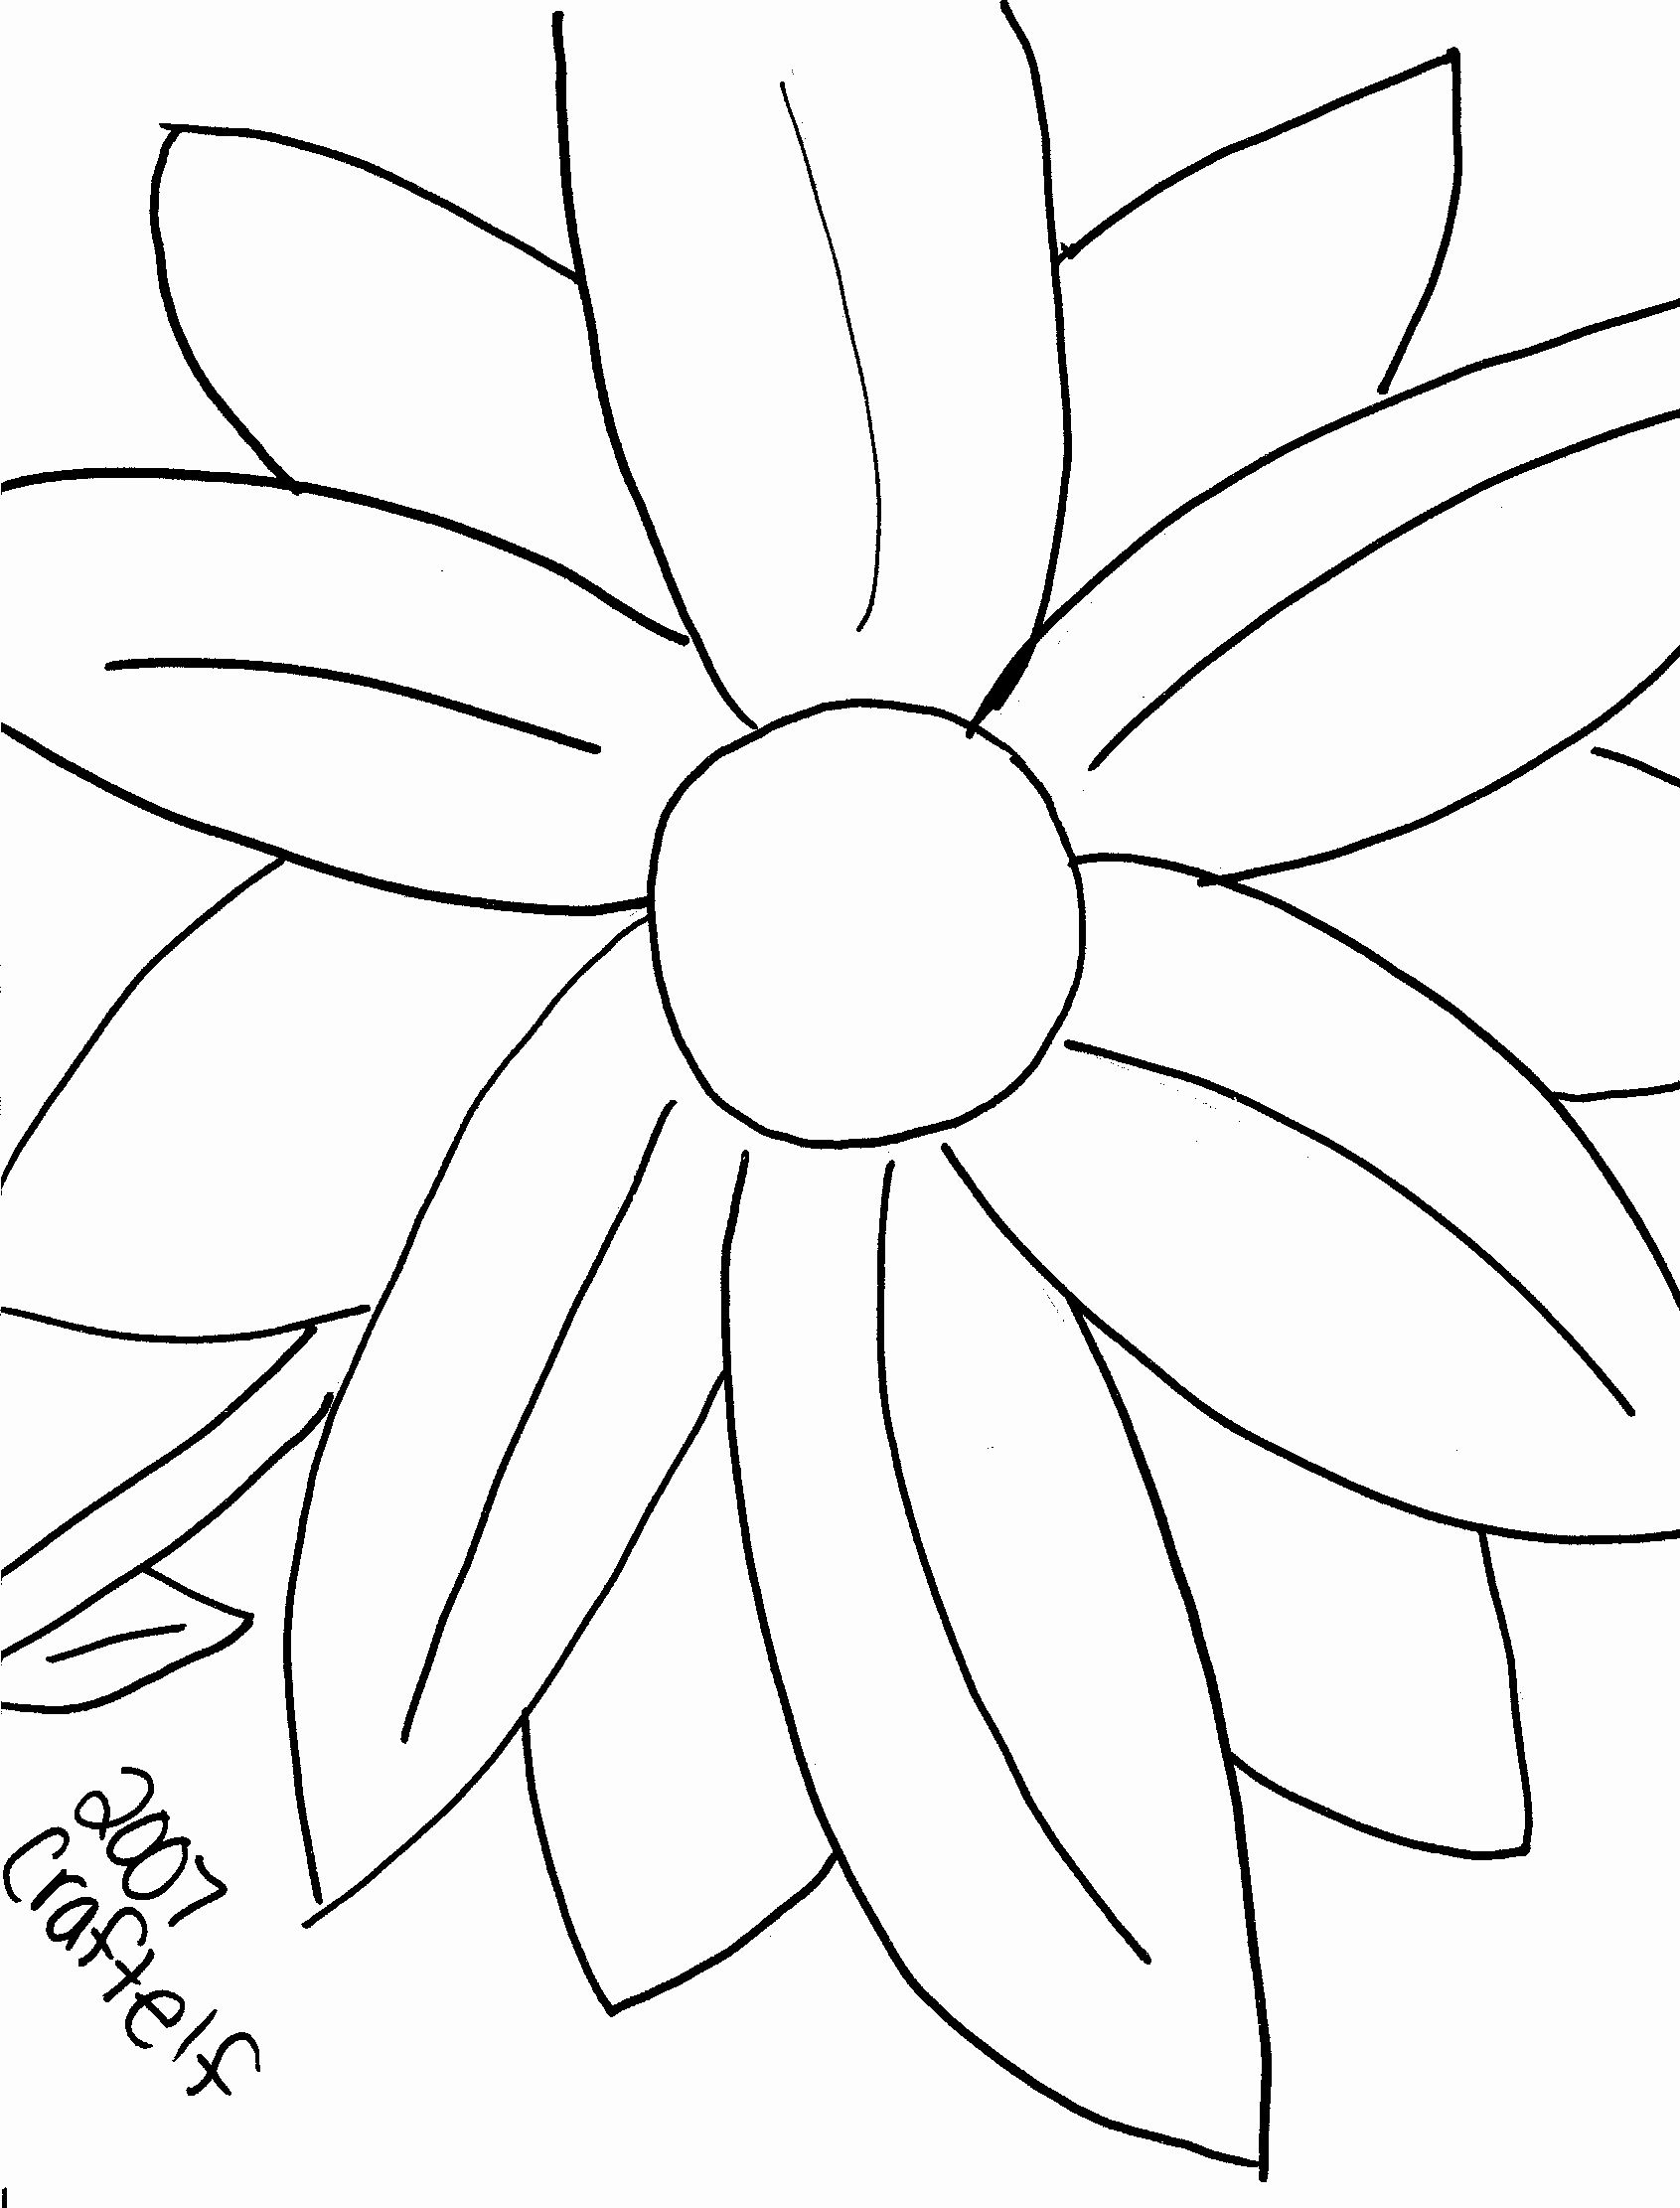 Big Flower Coloring Pages | Duathlongijon Coloring Blog | Flower coloring  sheets, Flower coloring pages, Free coloring pages